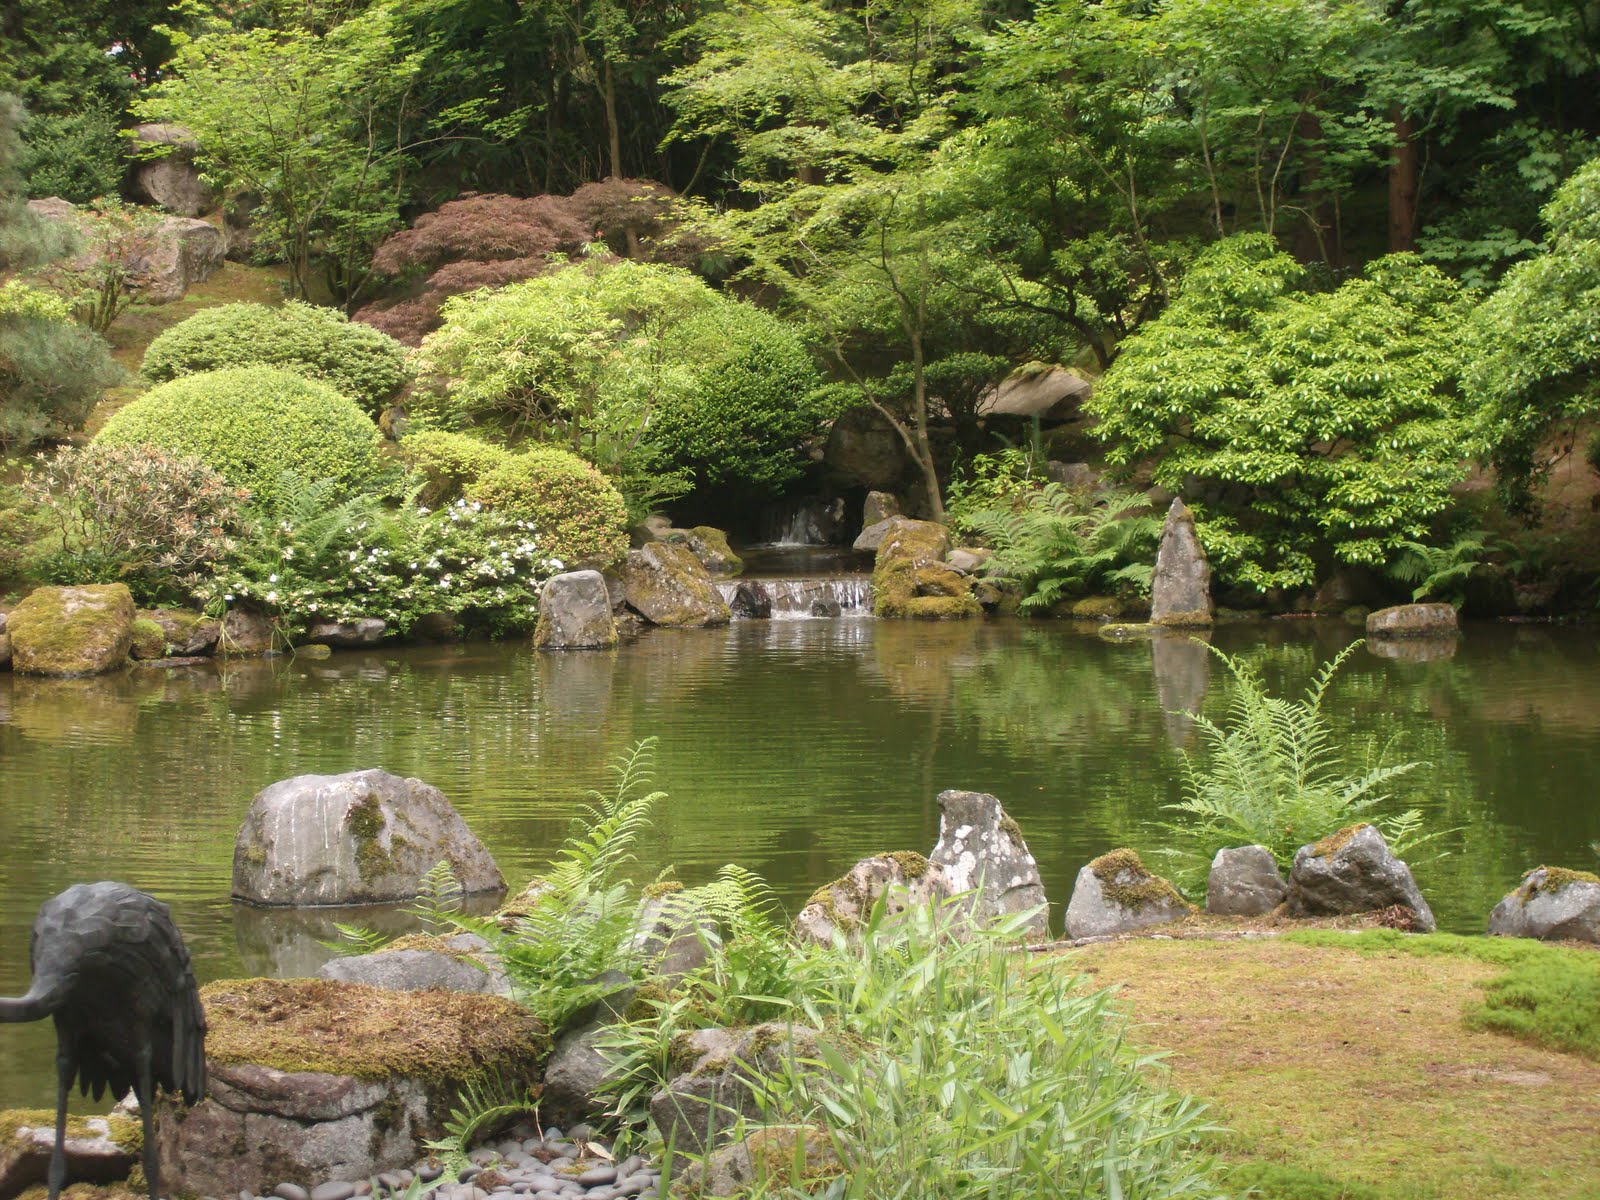 Taking a deeper look at the Portland Japanese Garden